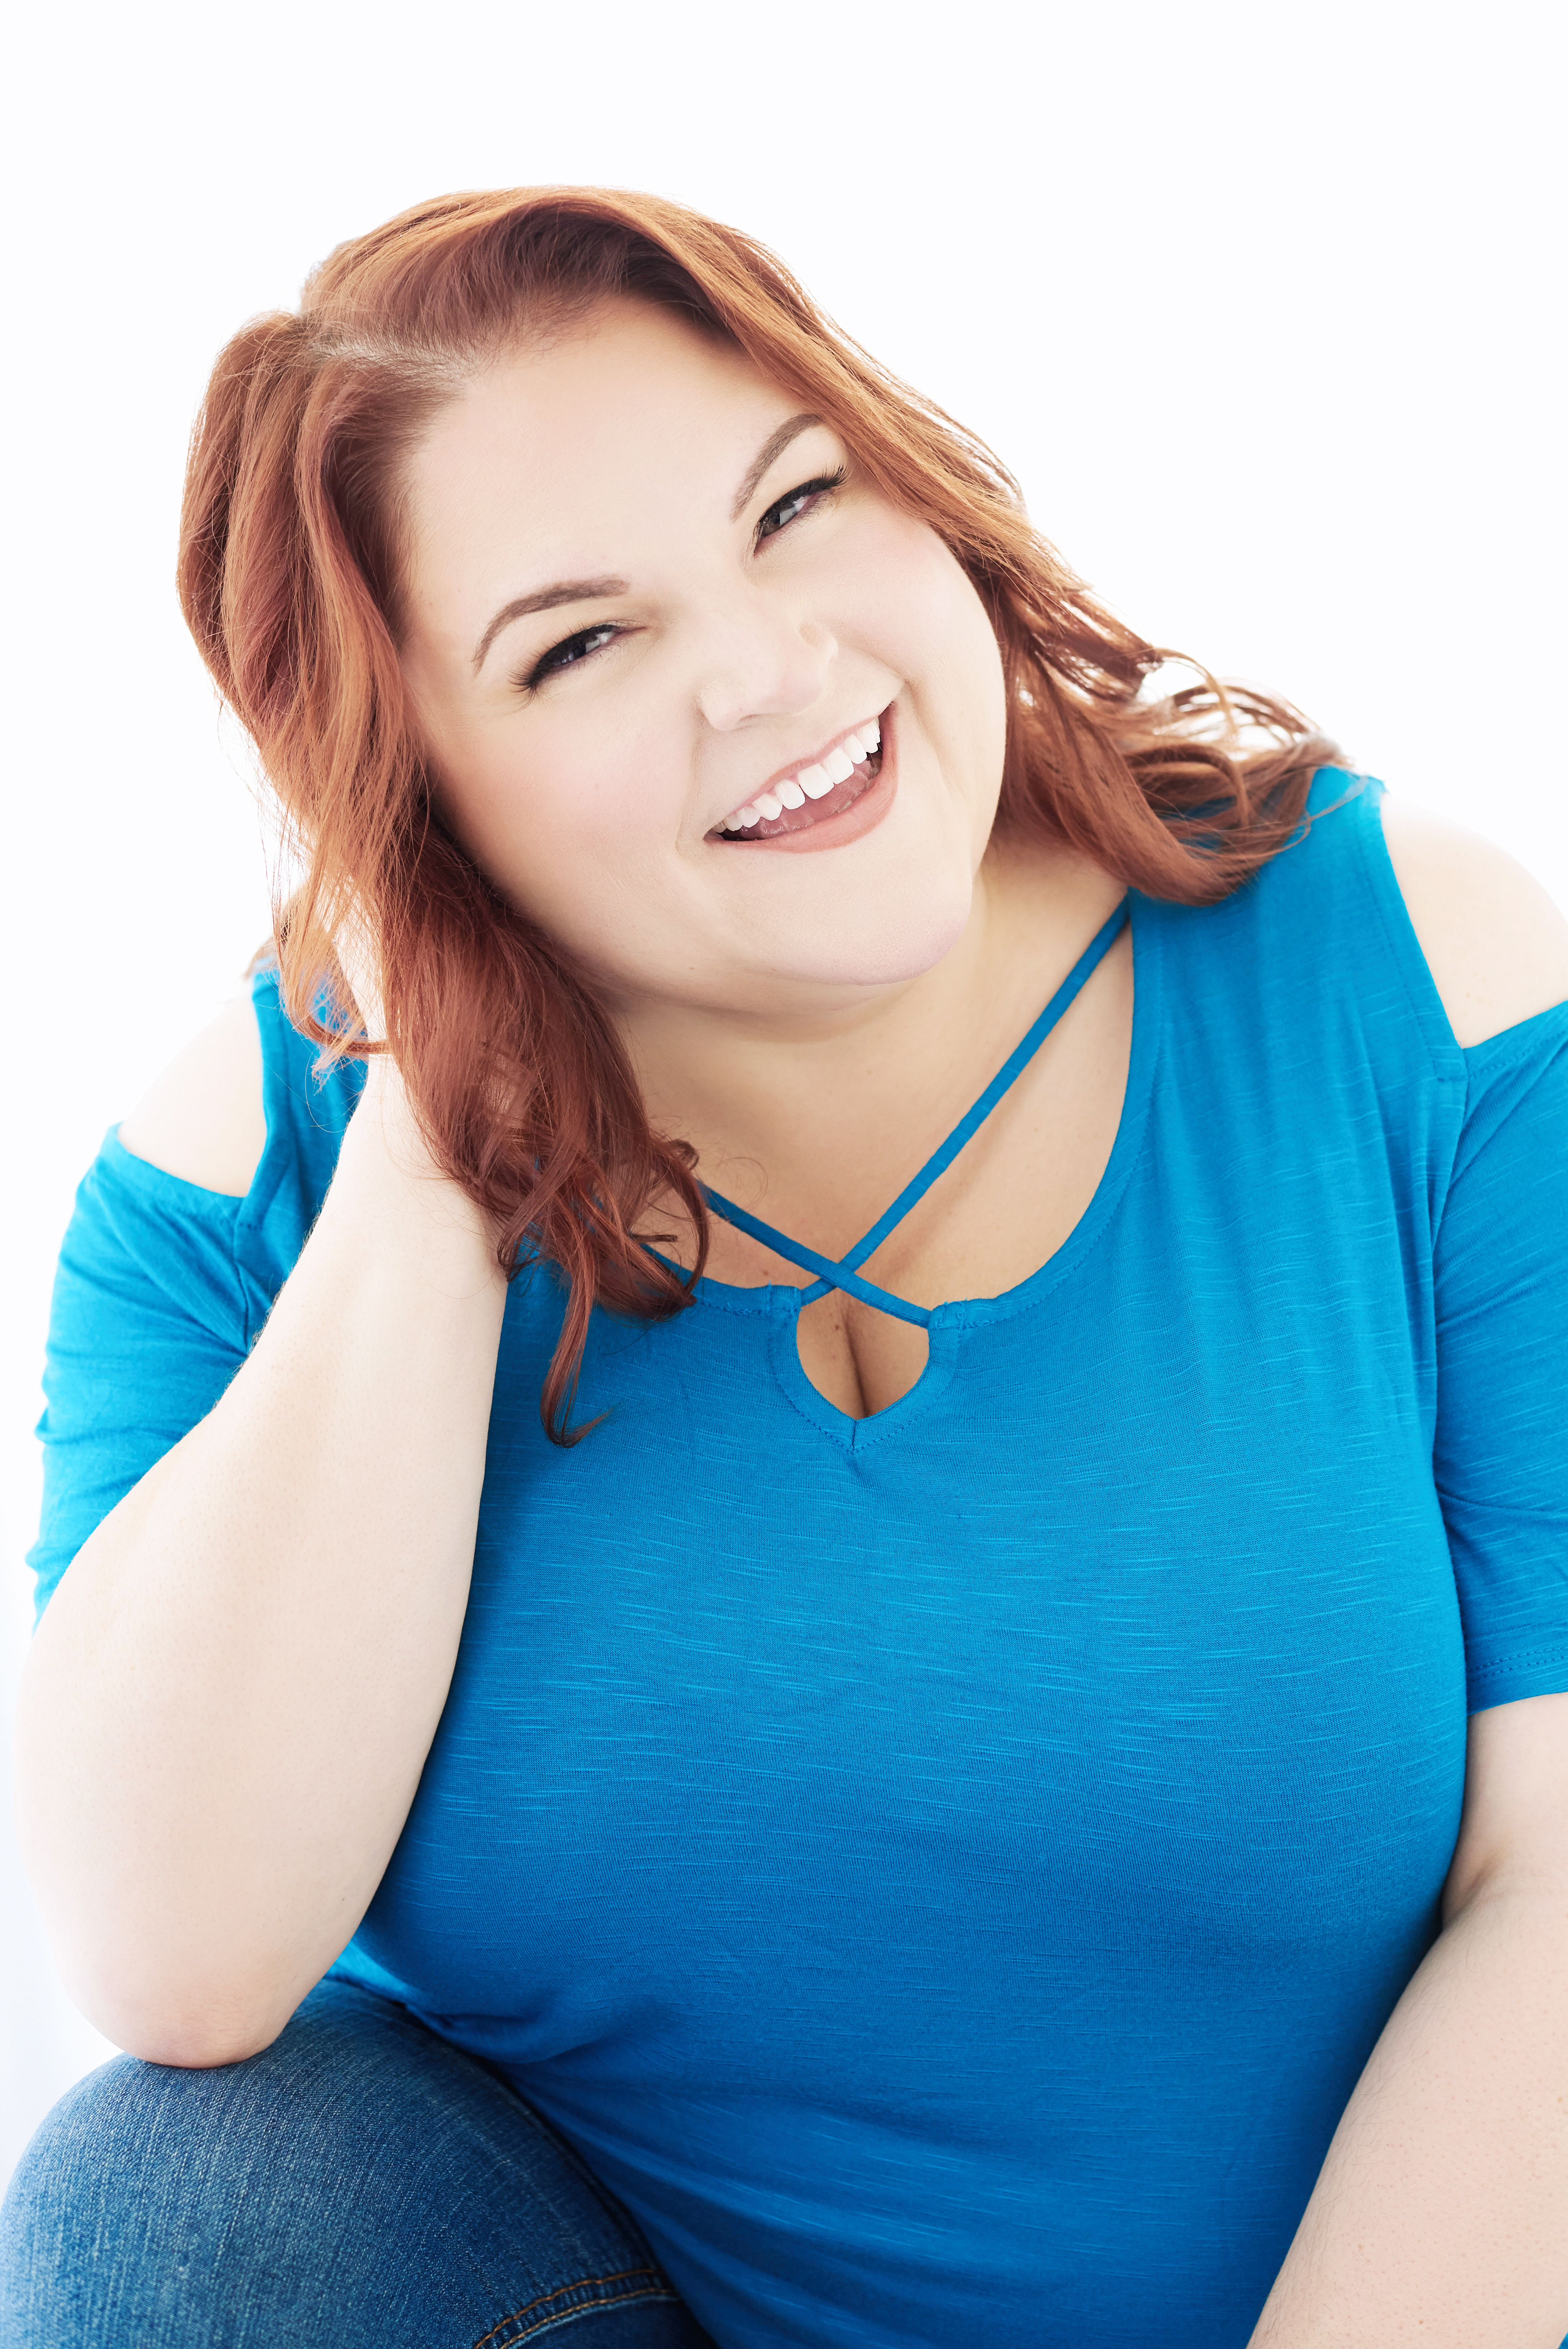 Beautiful laughing/smiling white woman with red hair wearing a blue t-shirt.